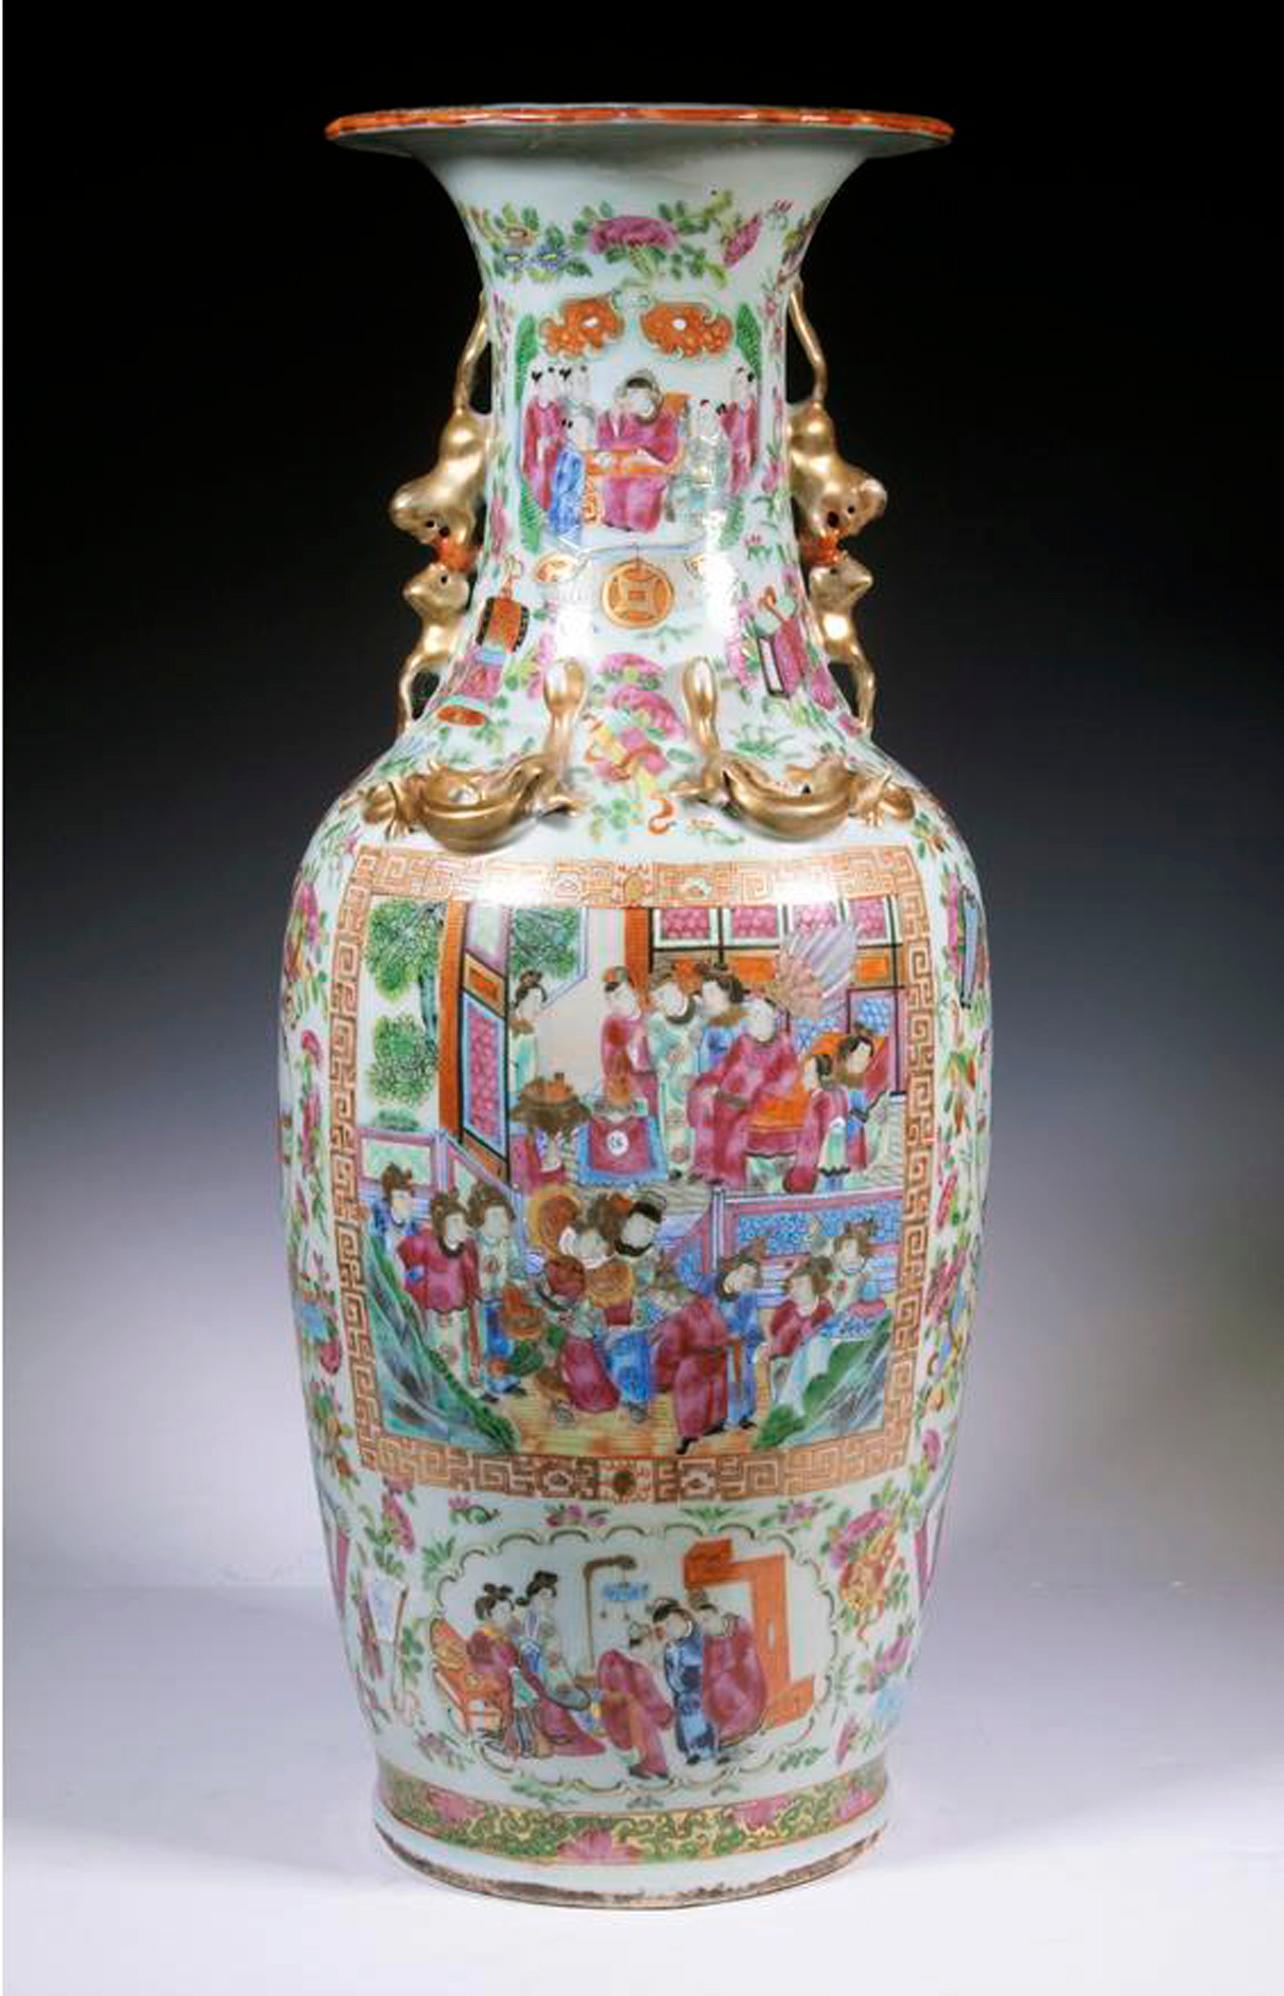 Chinese export porcelain rose Medallion large vase,
Circa 1860

The Chinese Rose Mandarin Porcelain Baluster vase is painted with court scenes in panels surrounded by floral, butterfly and auspicious symbol motifs. The gilt handles are in the